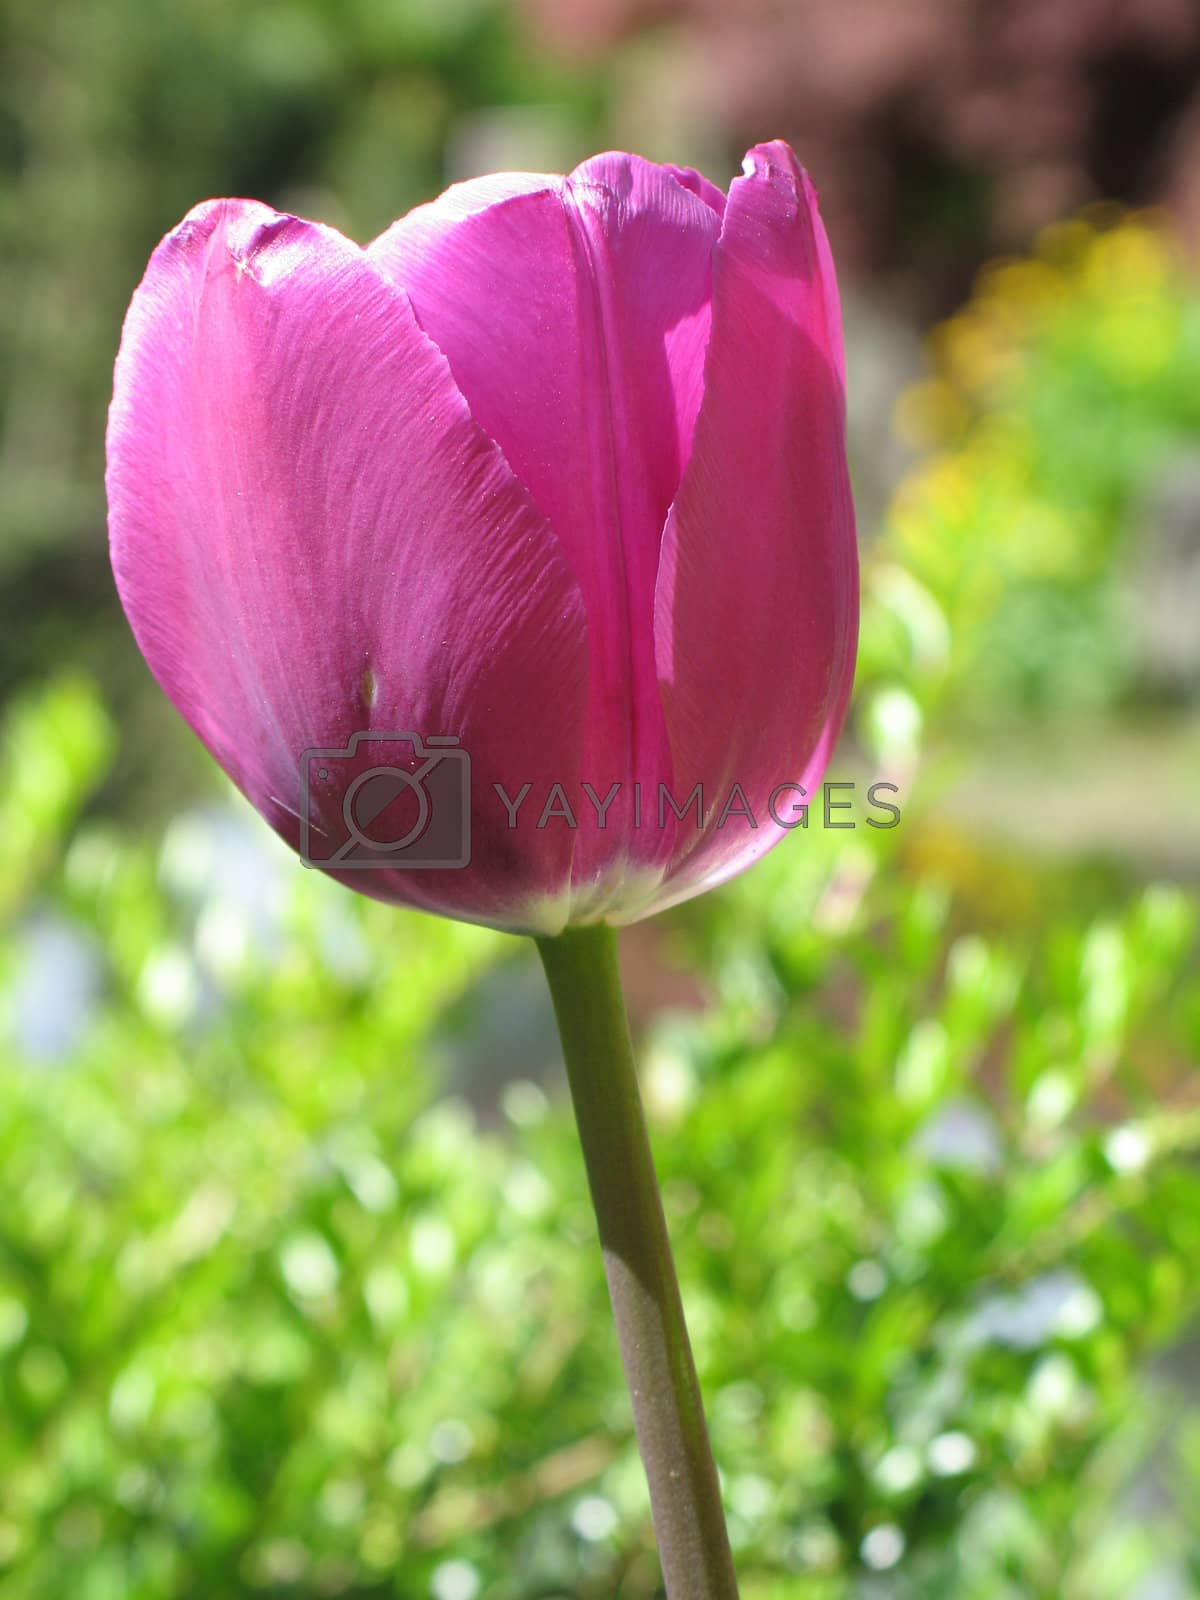 Royalty free image of purple tulips by mmm